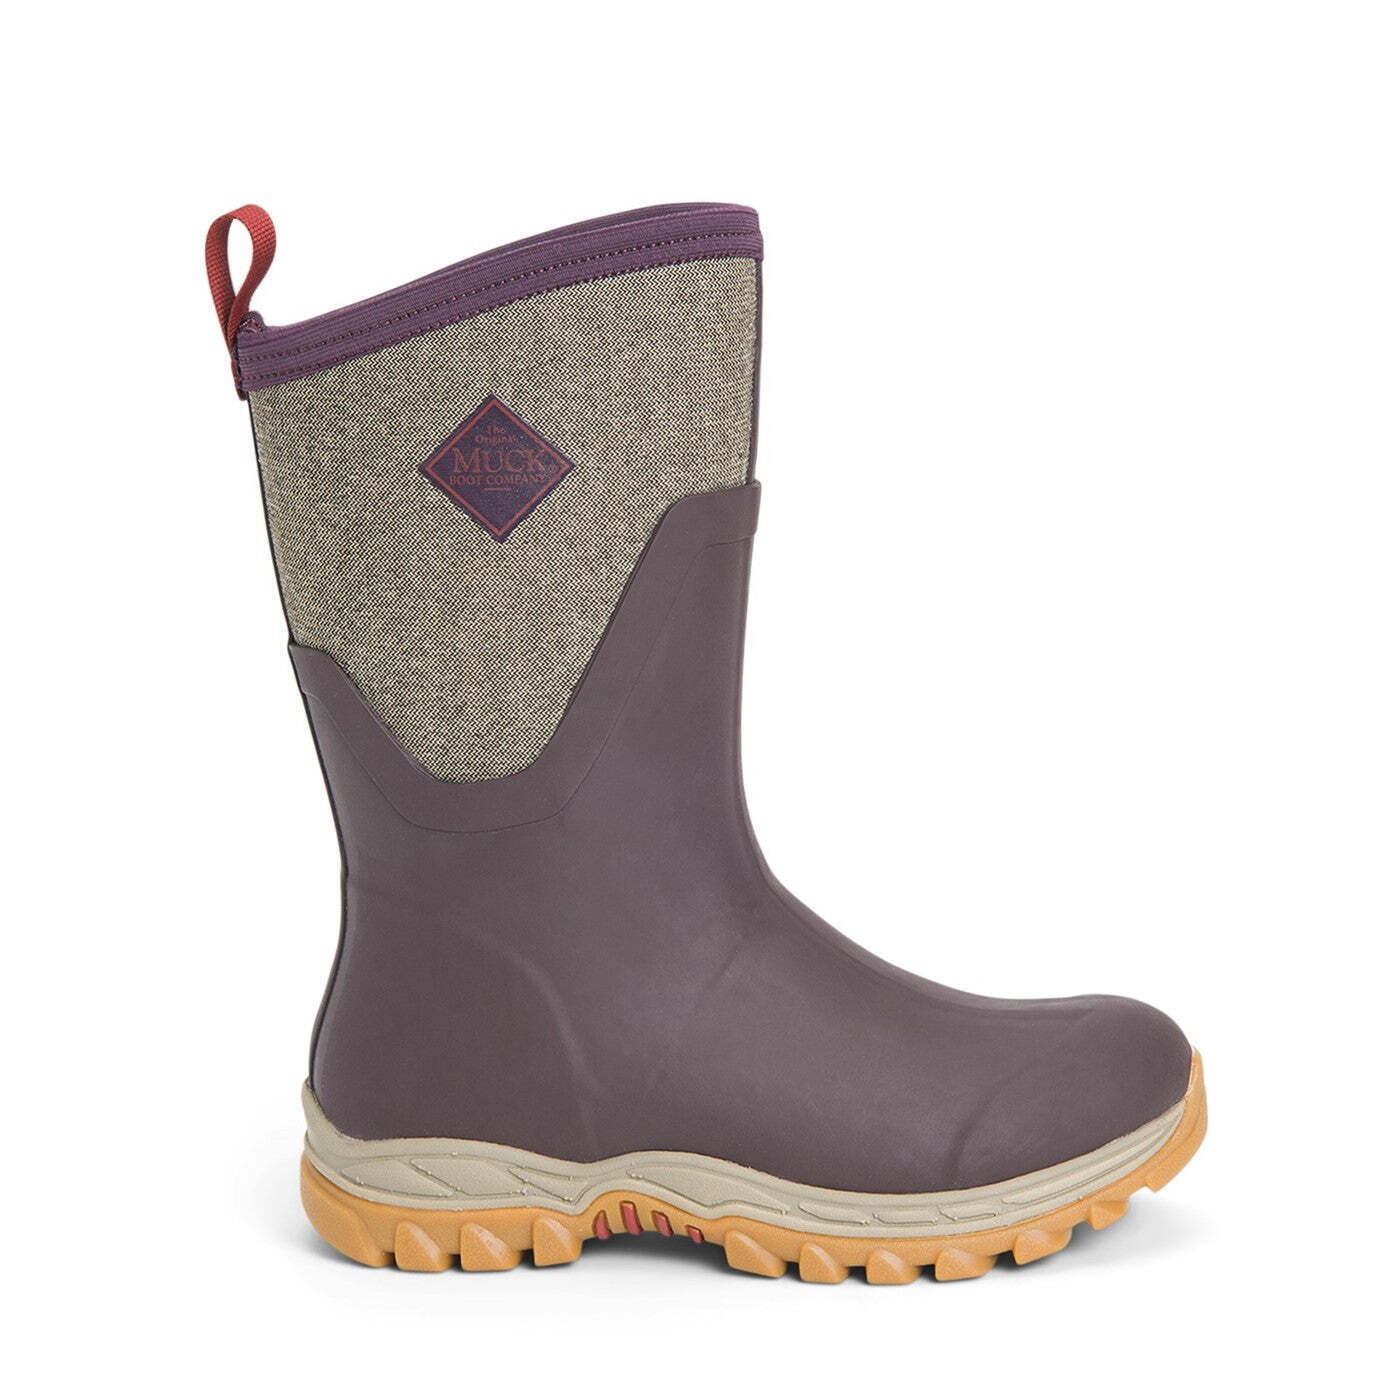 Unisex Mid Pull On Wellies Muck Boots Arctic Sport